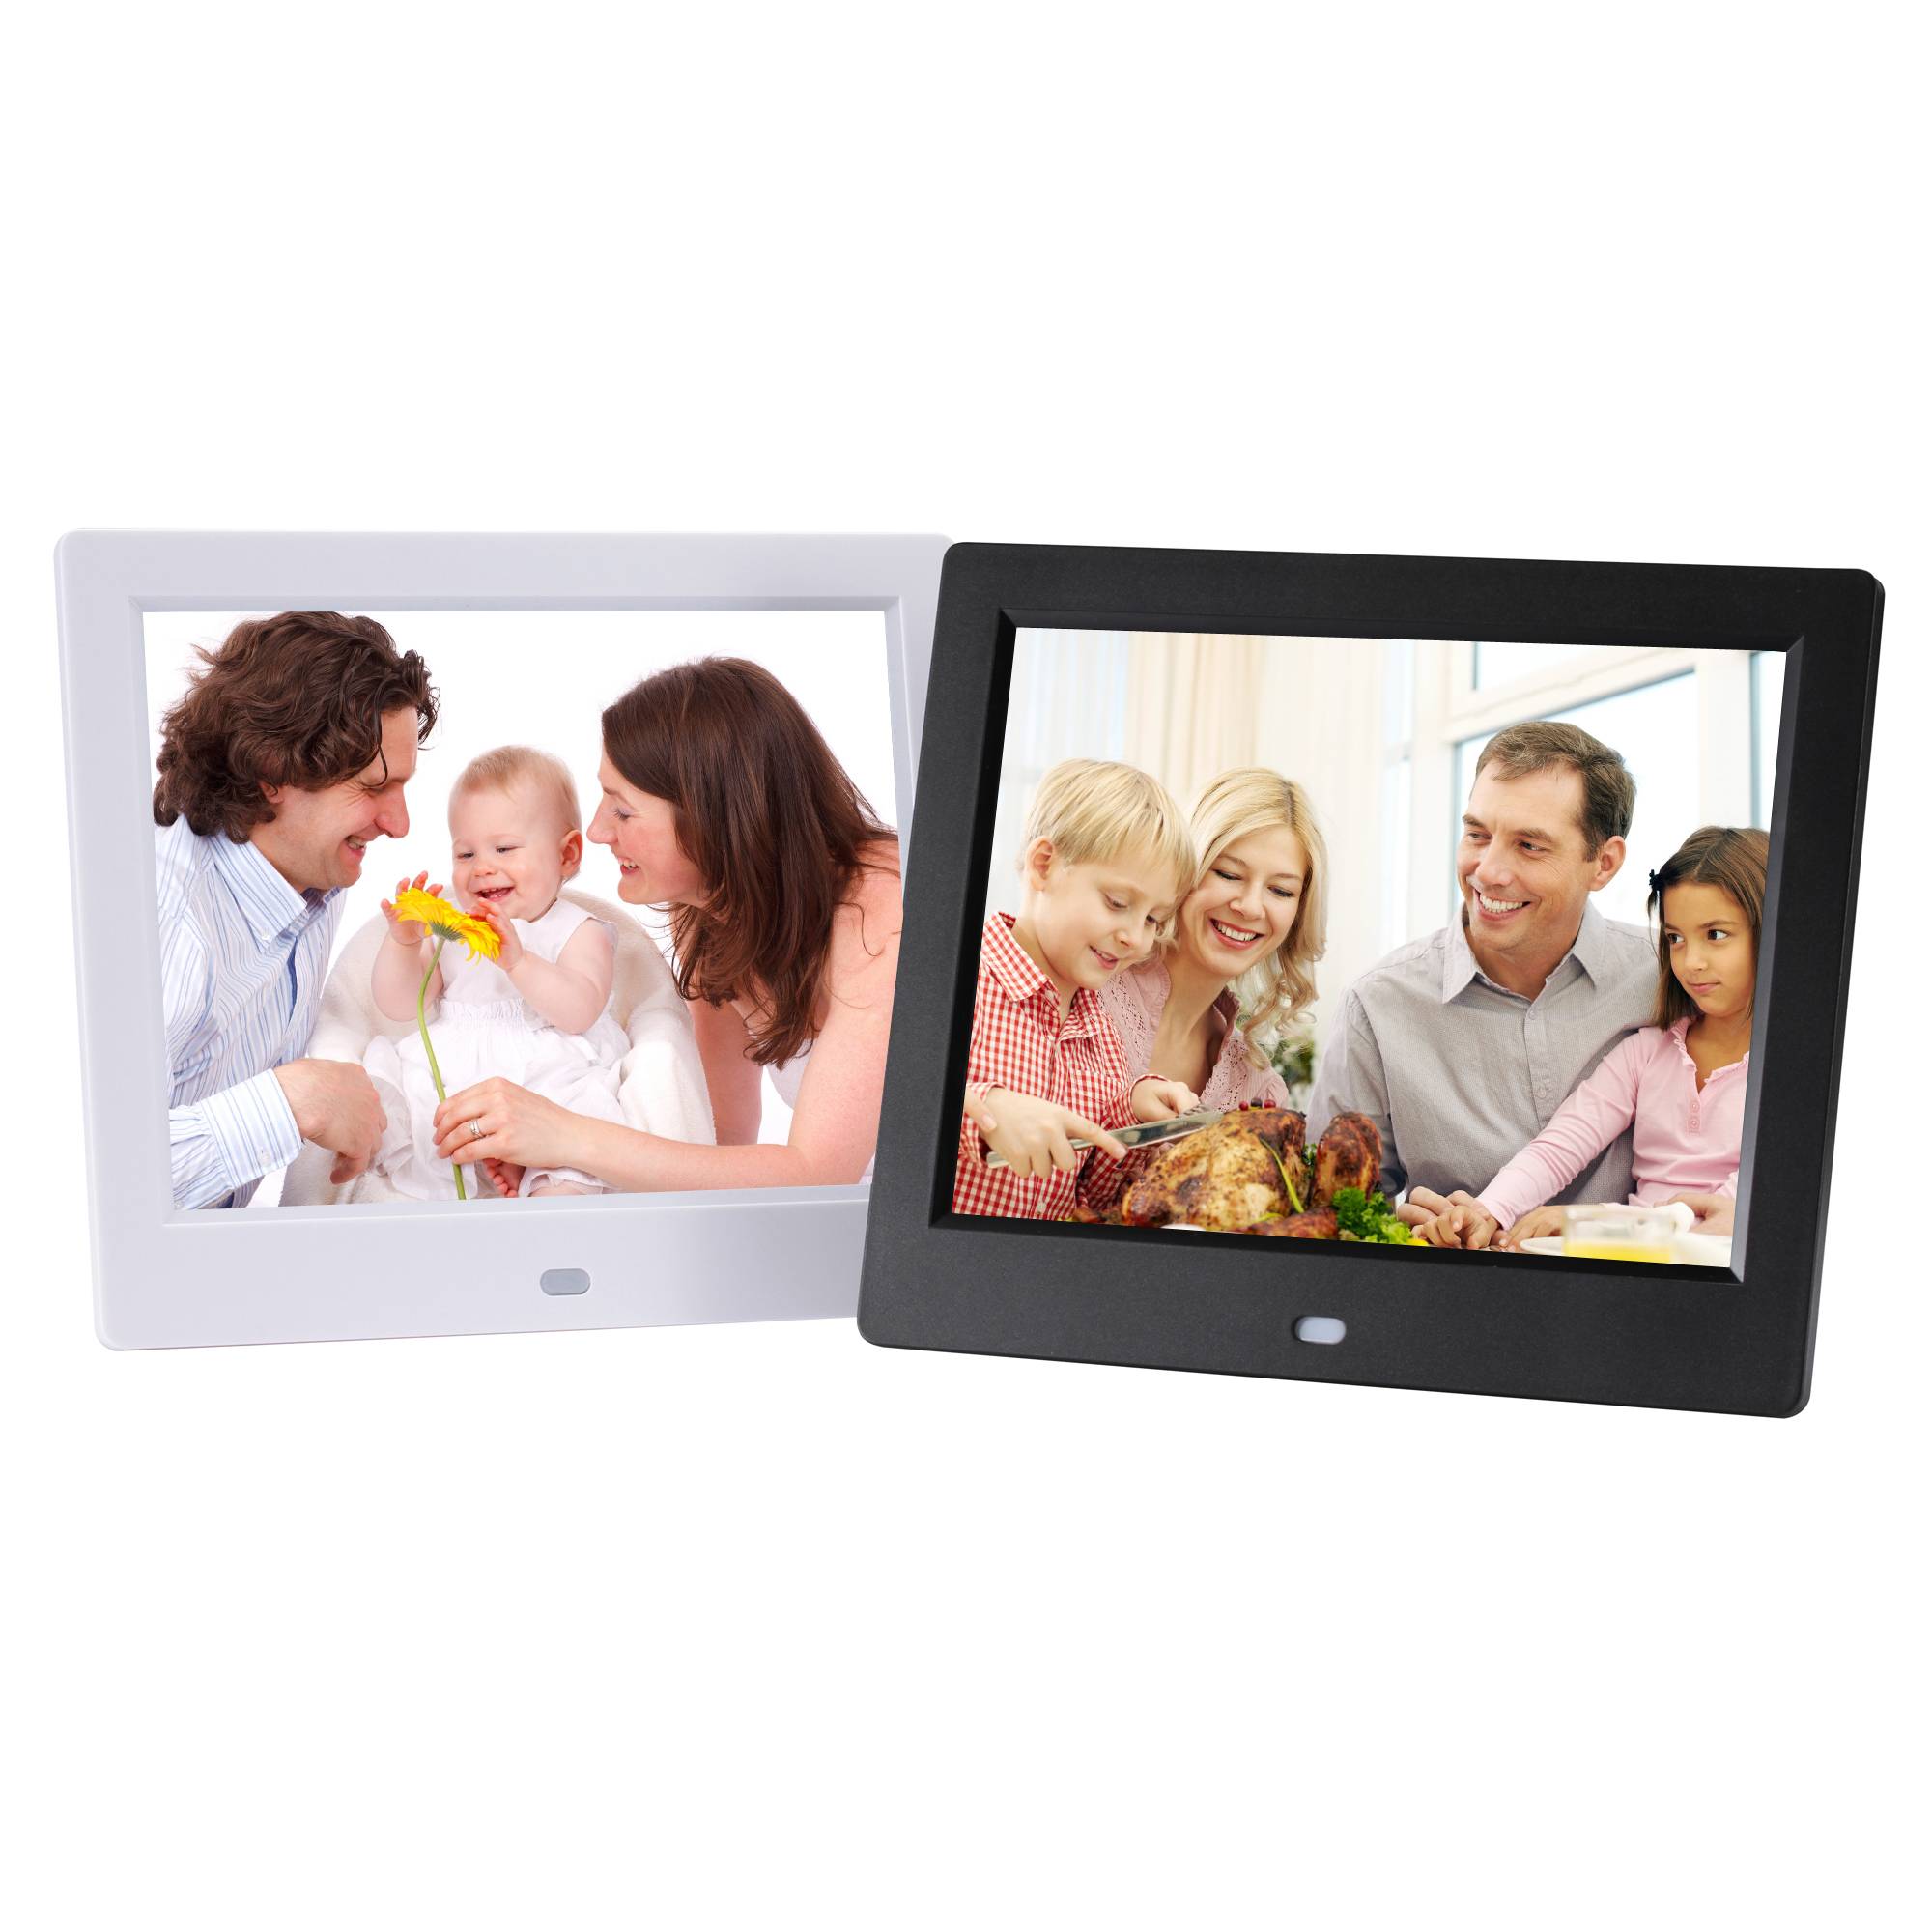 China Manufacturer for Digital Home Calendar - 8 inch slideshow cheap video player digital picture frame digital photo frame commercial advertising HD support 720P – Idealway